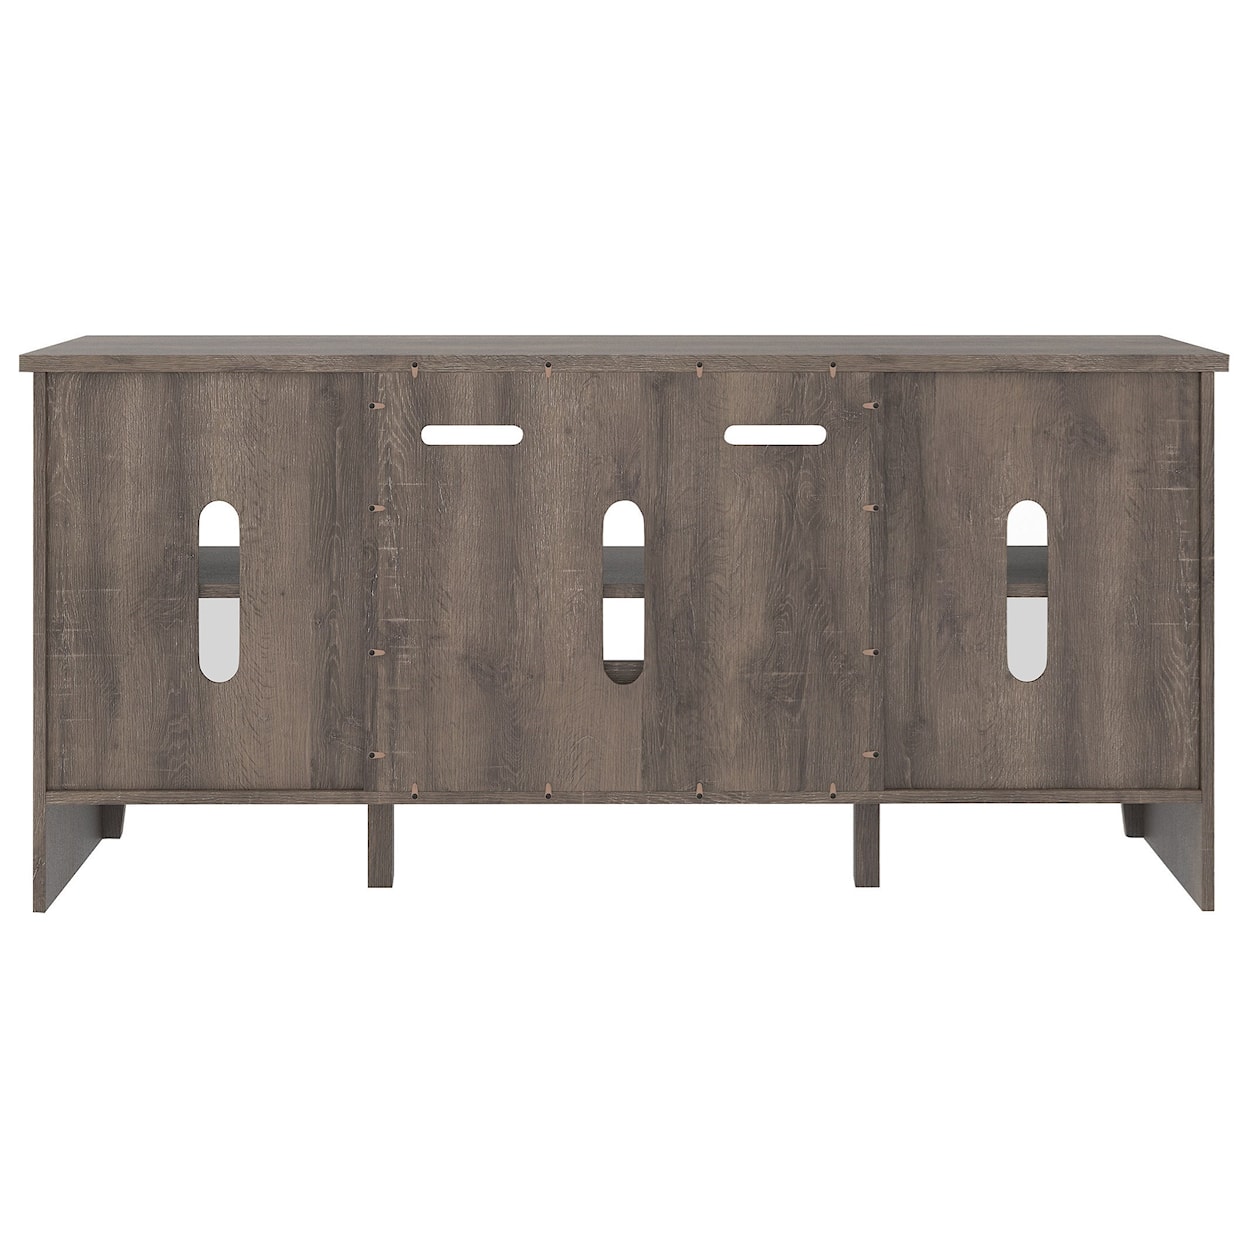 Signature Design by Ashley Arlenbry Large TV Stand